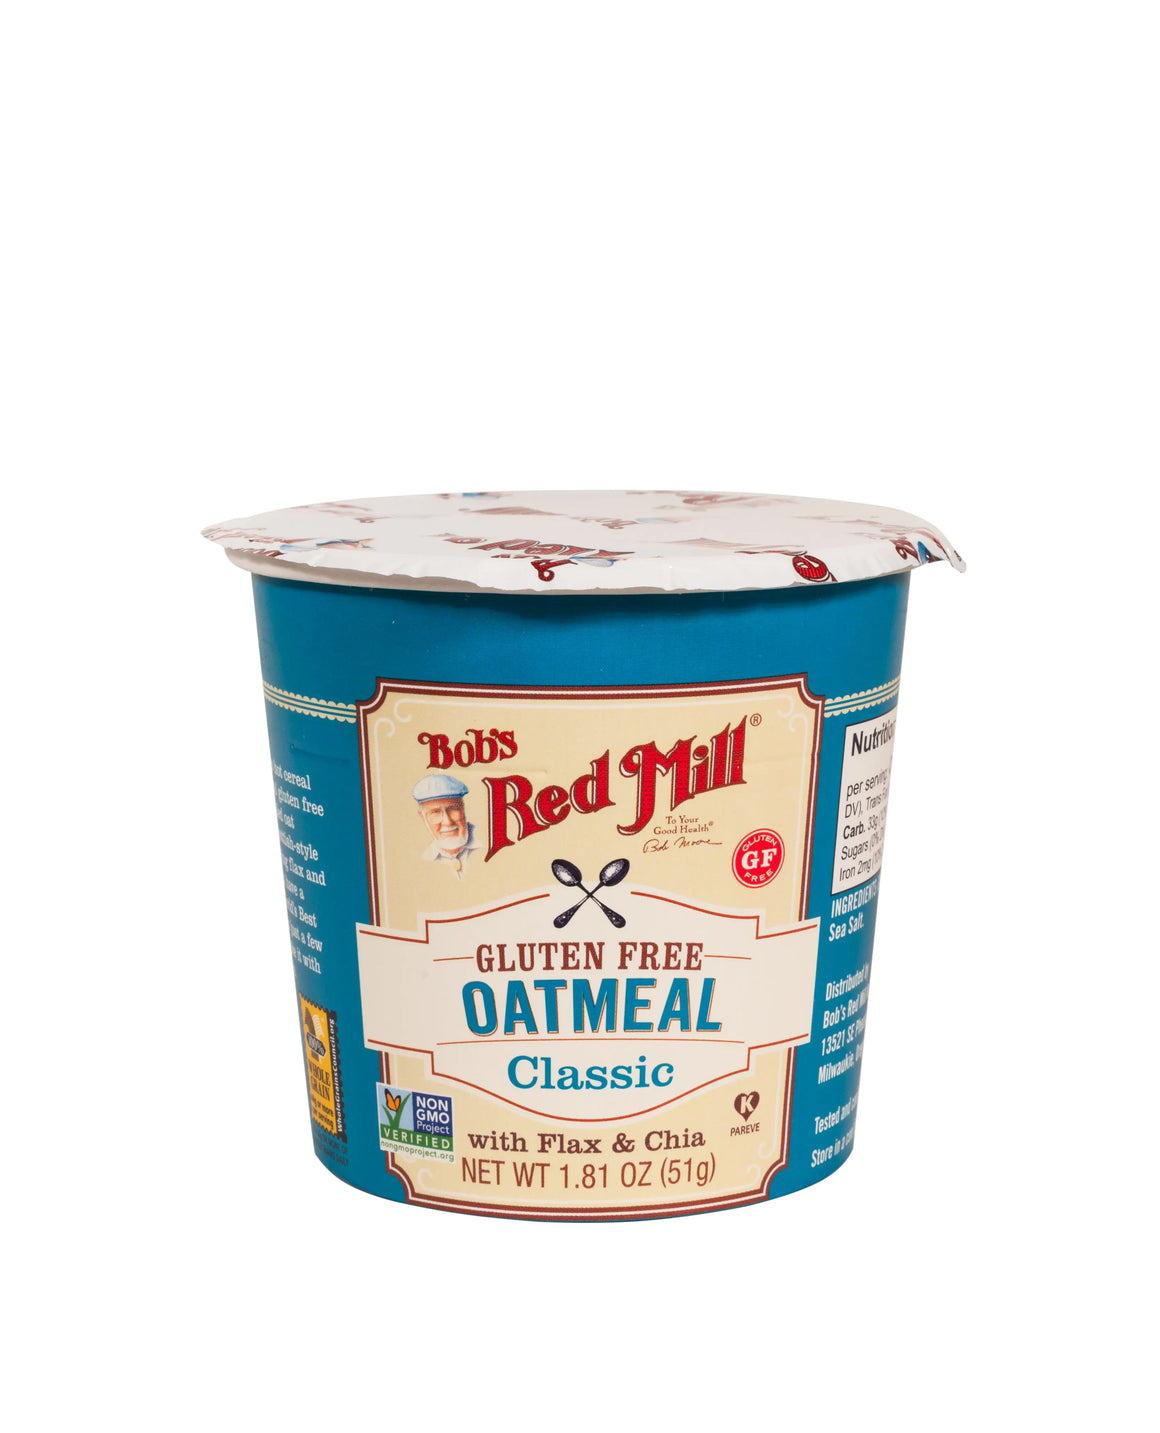 Bob's Red Mill Gluten Free Oatmeal Cup Classic with Flax & Chia, Non-GMO 51gm Bob's Red Mill